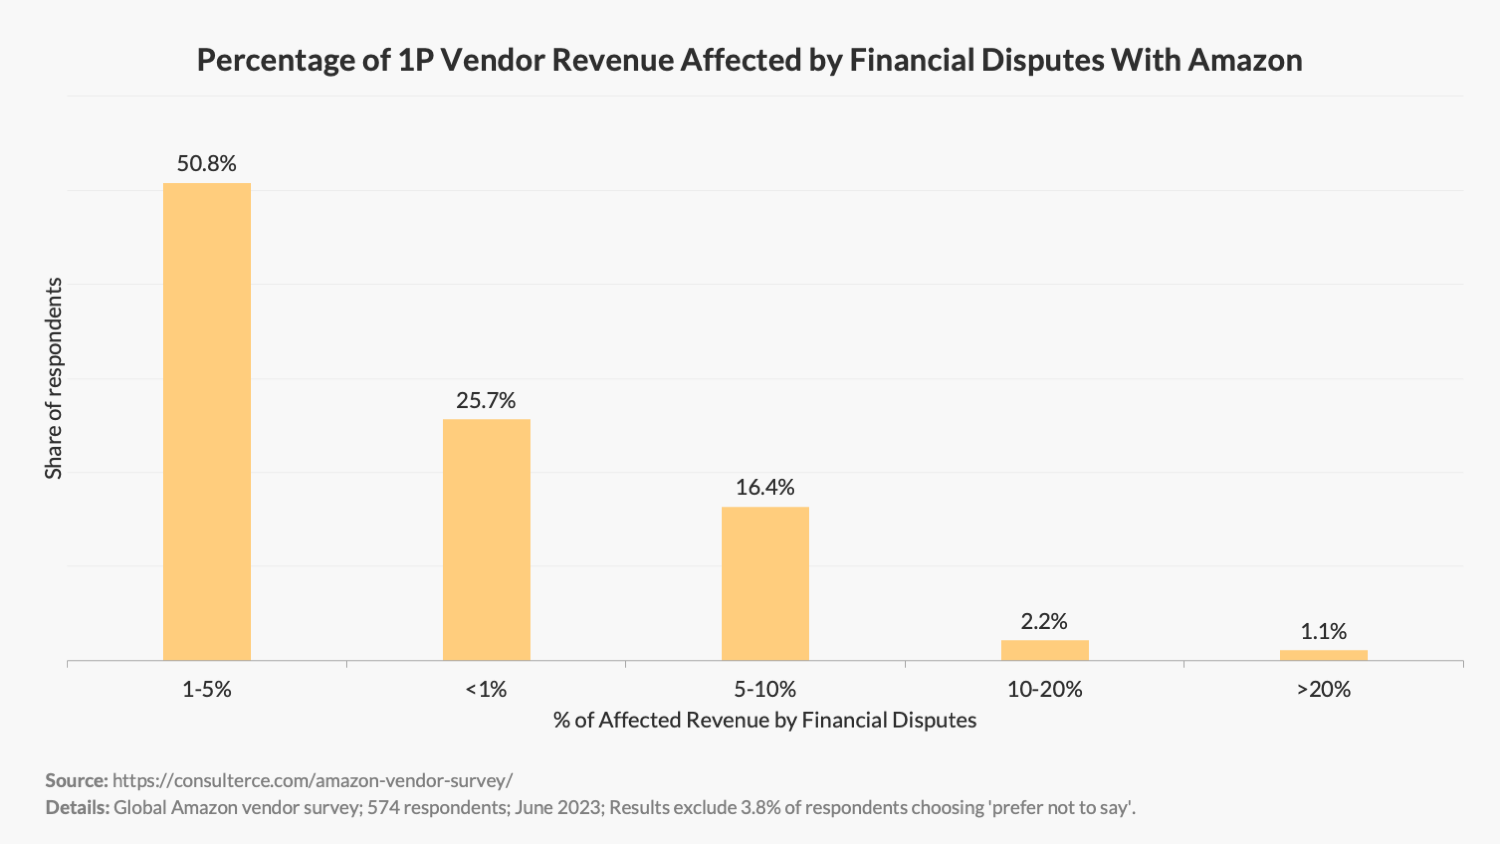 Revenue affected by financial disputes with Amazon